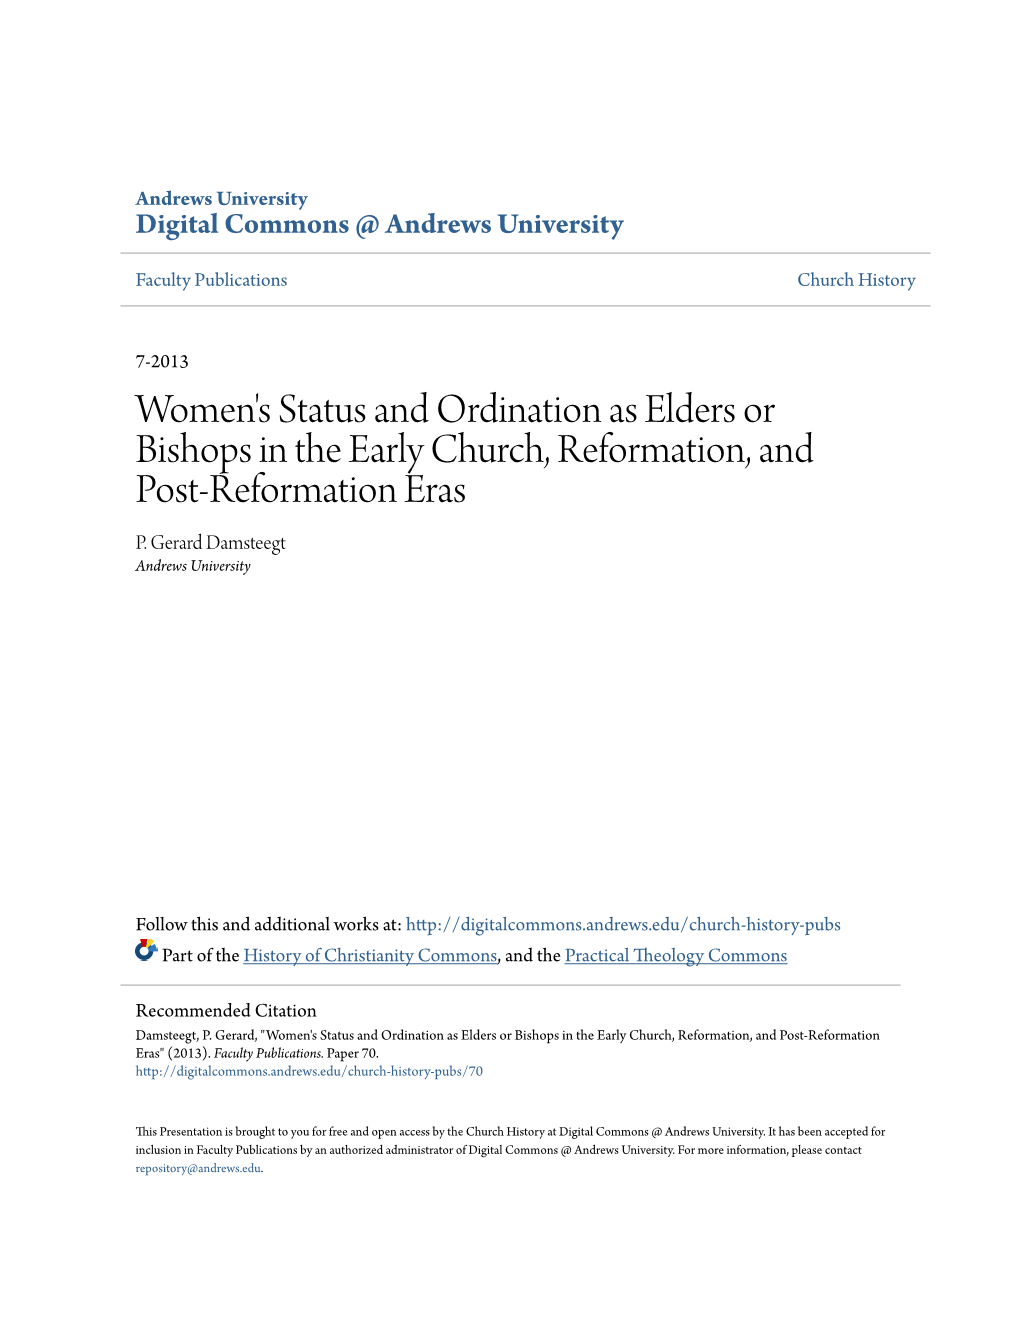 Women's Status and Ordination As Elders Or Bishops in the Early Church, Reformation, and Post-Reformation Eras P